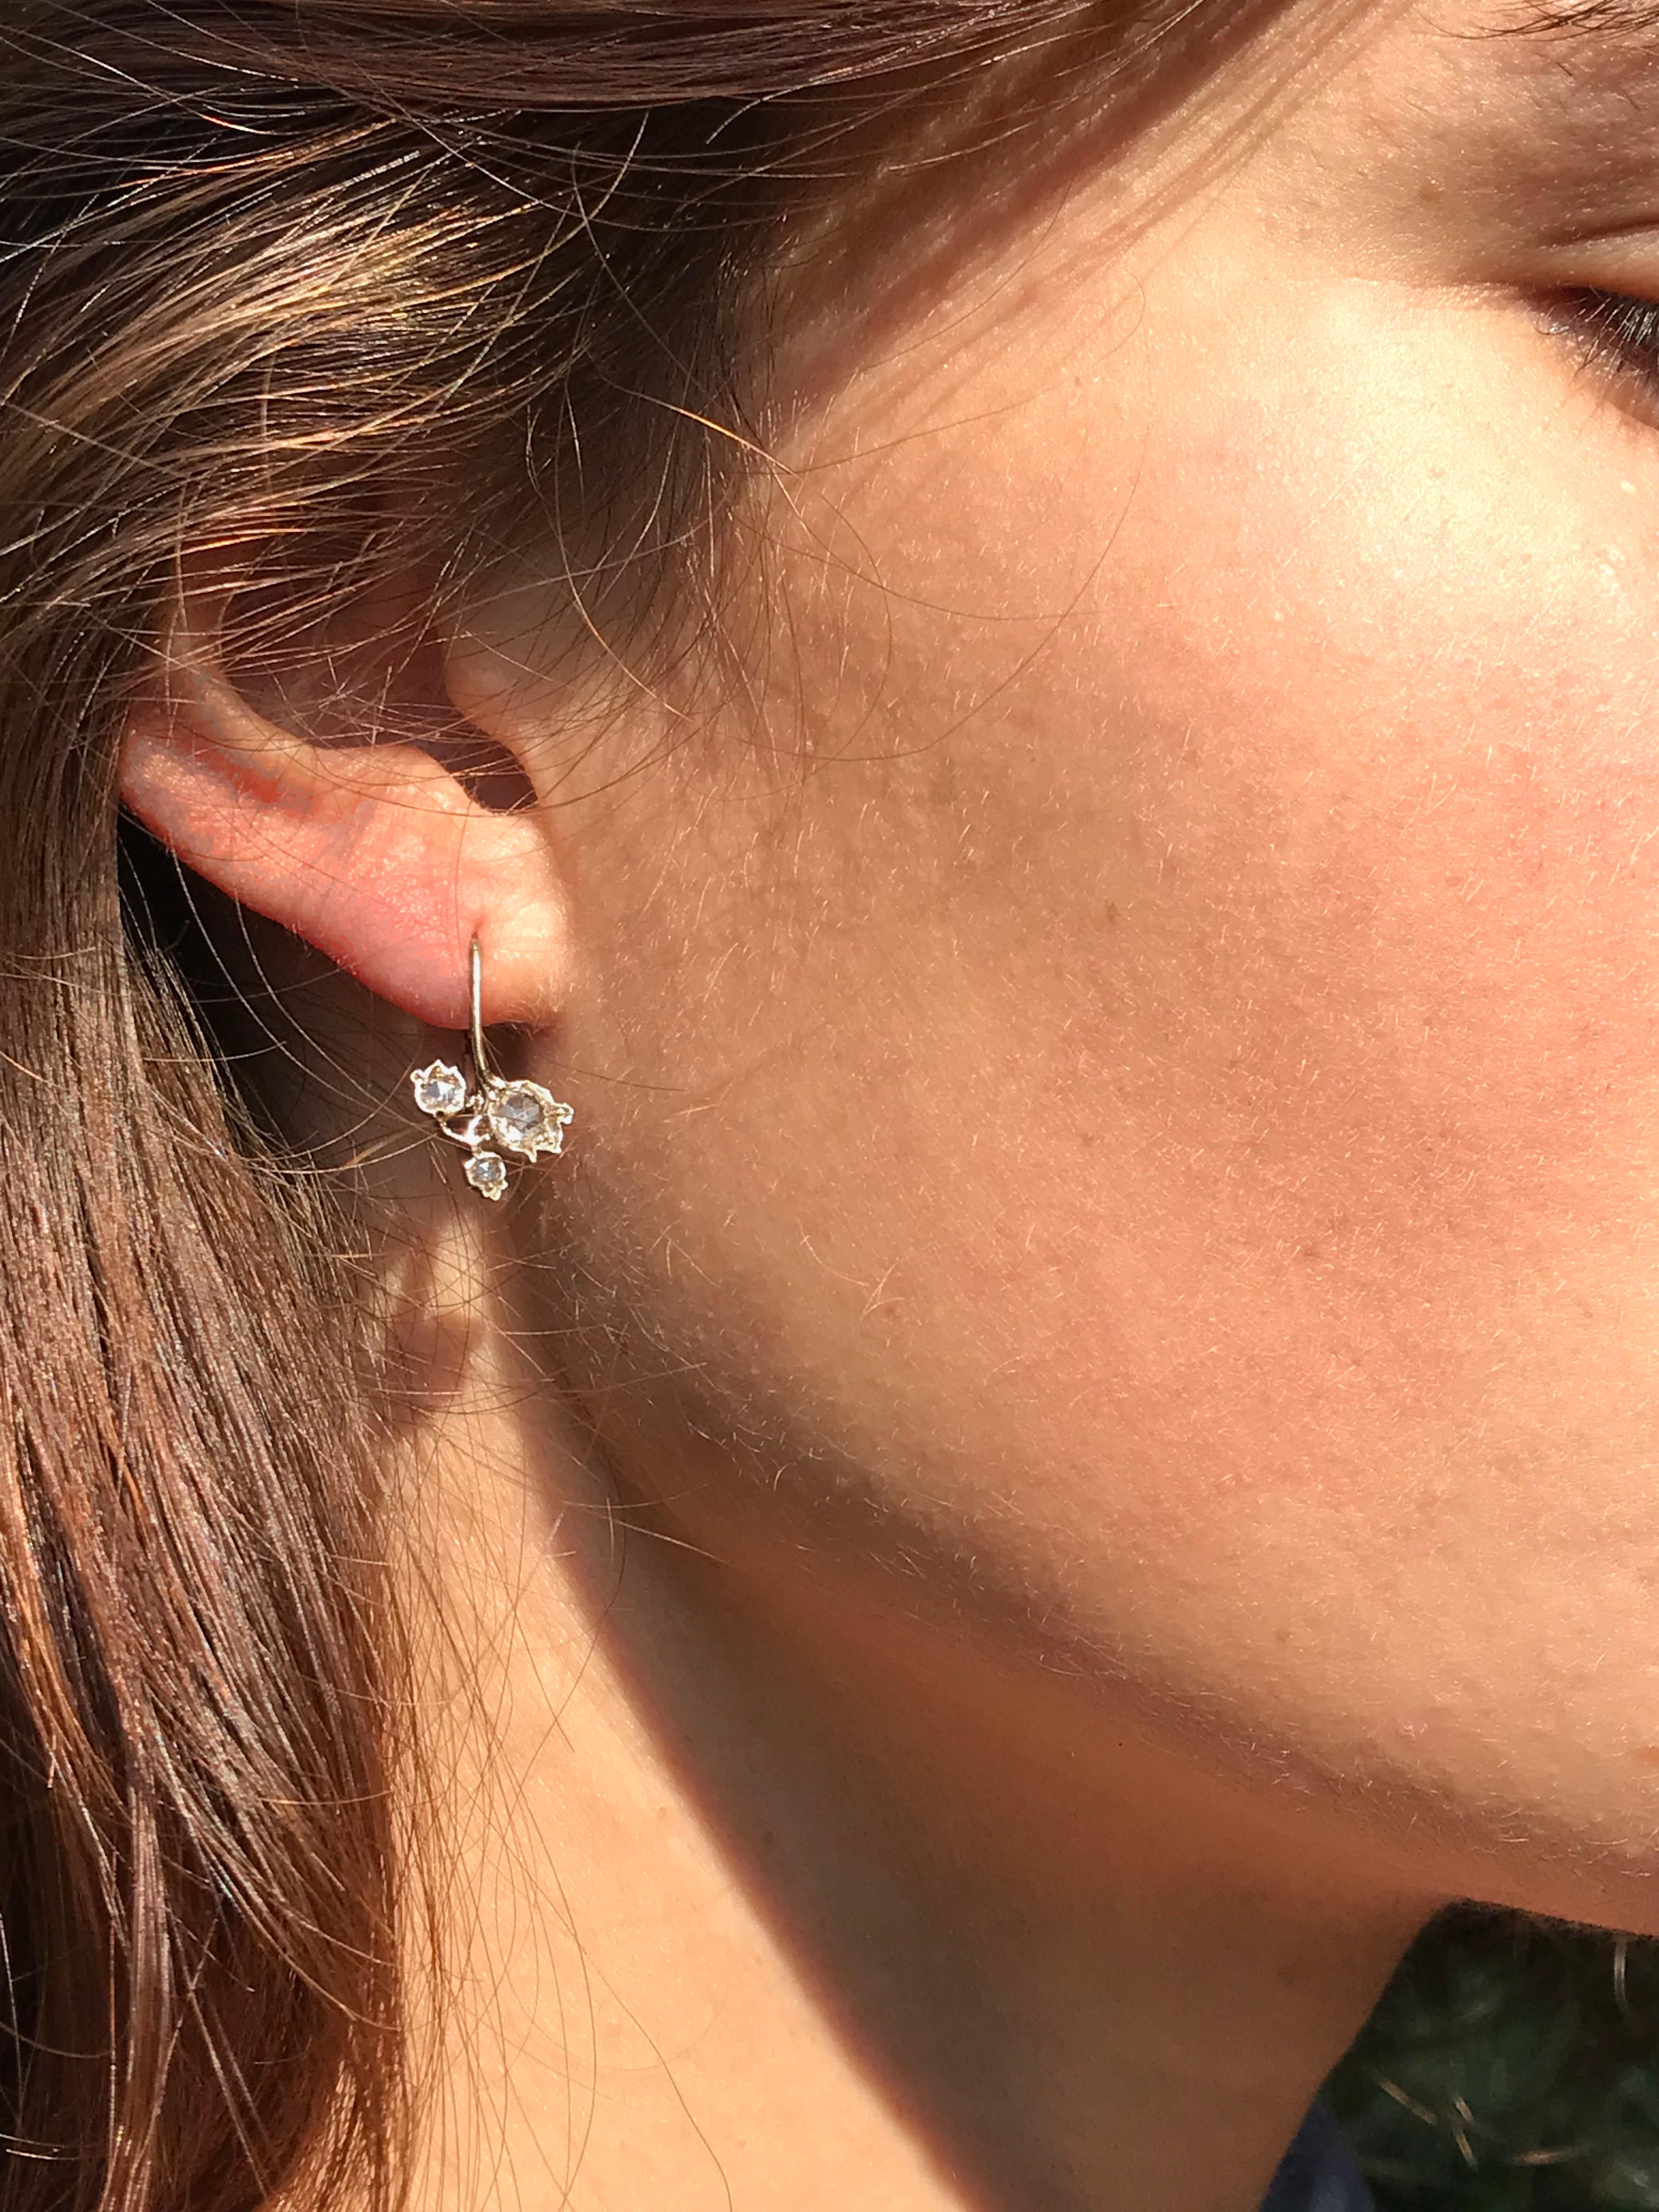 Dalben design diamond floral drop earrings mounted in 18 kt white gold with 6 white rose cut diamonds total weight 0,52 carat.
Earrings dimension:
max width 10 mm ,
height without leverback 9 mm
height with leverback 17 mm
The Earrings are